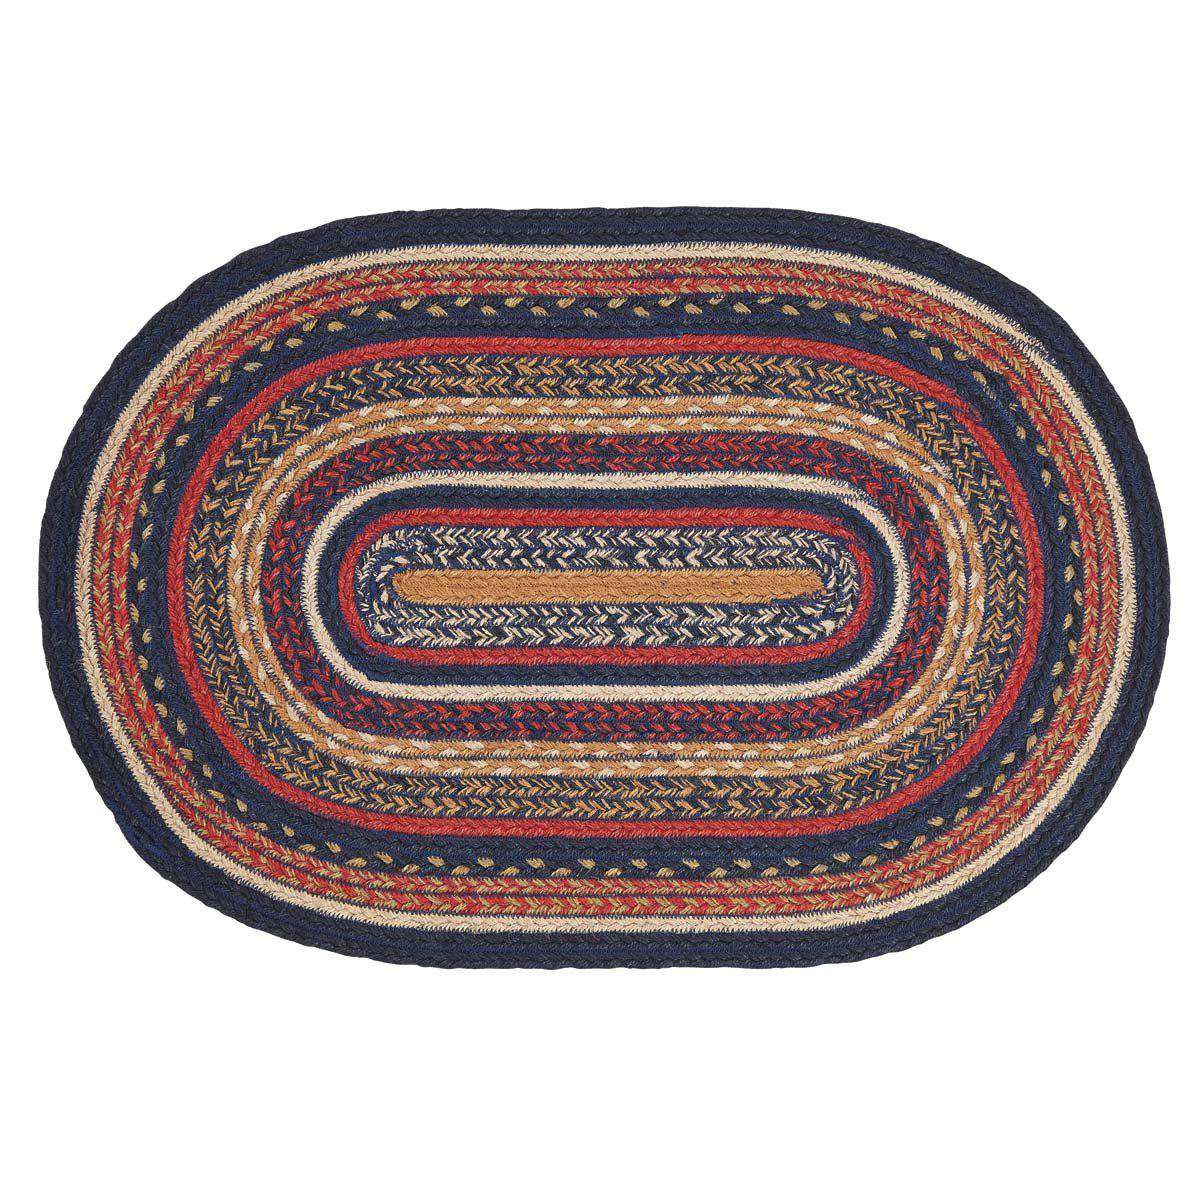 Stratton Jute Braided Rugs Oval VHC Brands Rugs VHC Brands 20" x 30" 